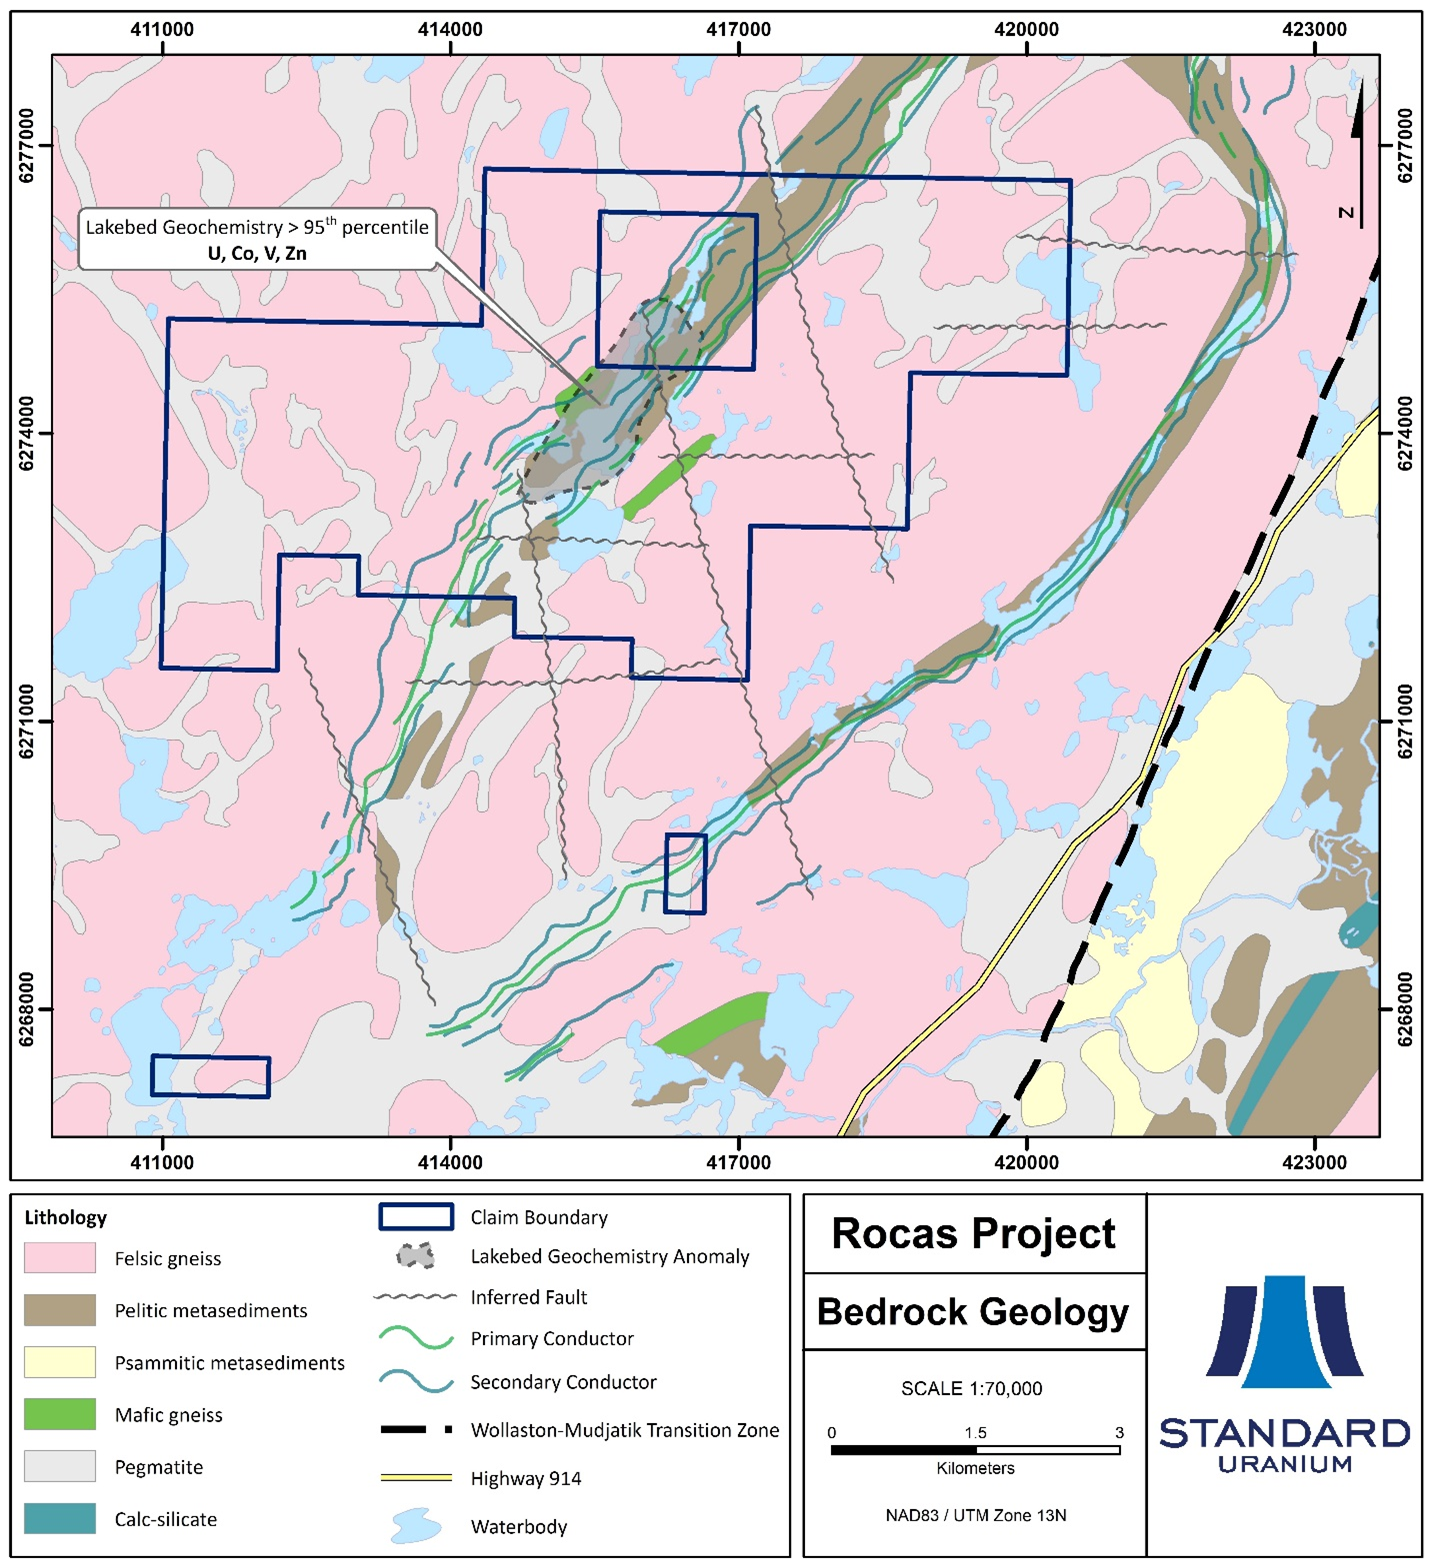 Plan map showing regional bedrock geology of the Rocas project area and EM conductors coincident with anomalous lakebed geochemical samples.